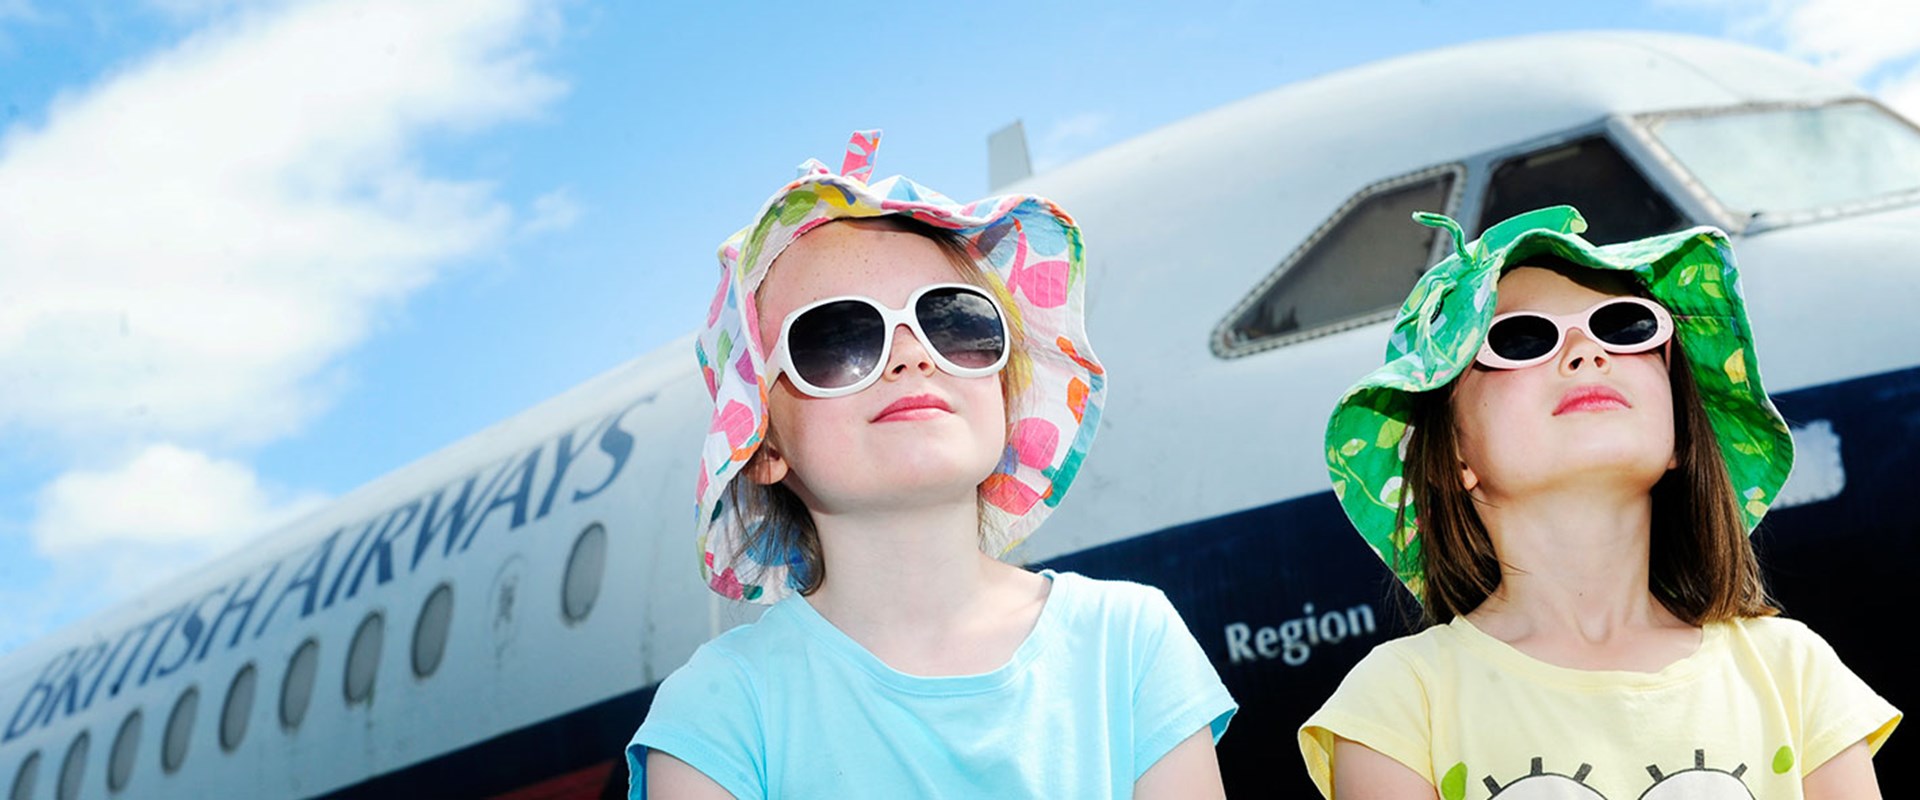 Two children in sunglasses and hats look up with a British Airways plane behind them.